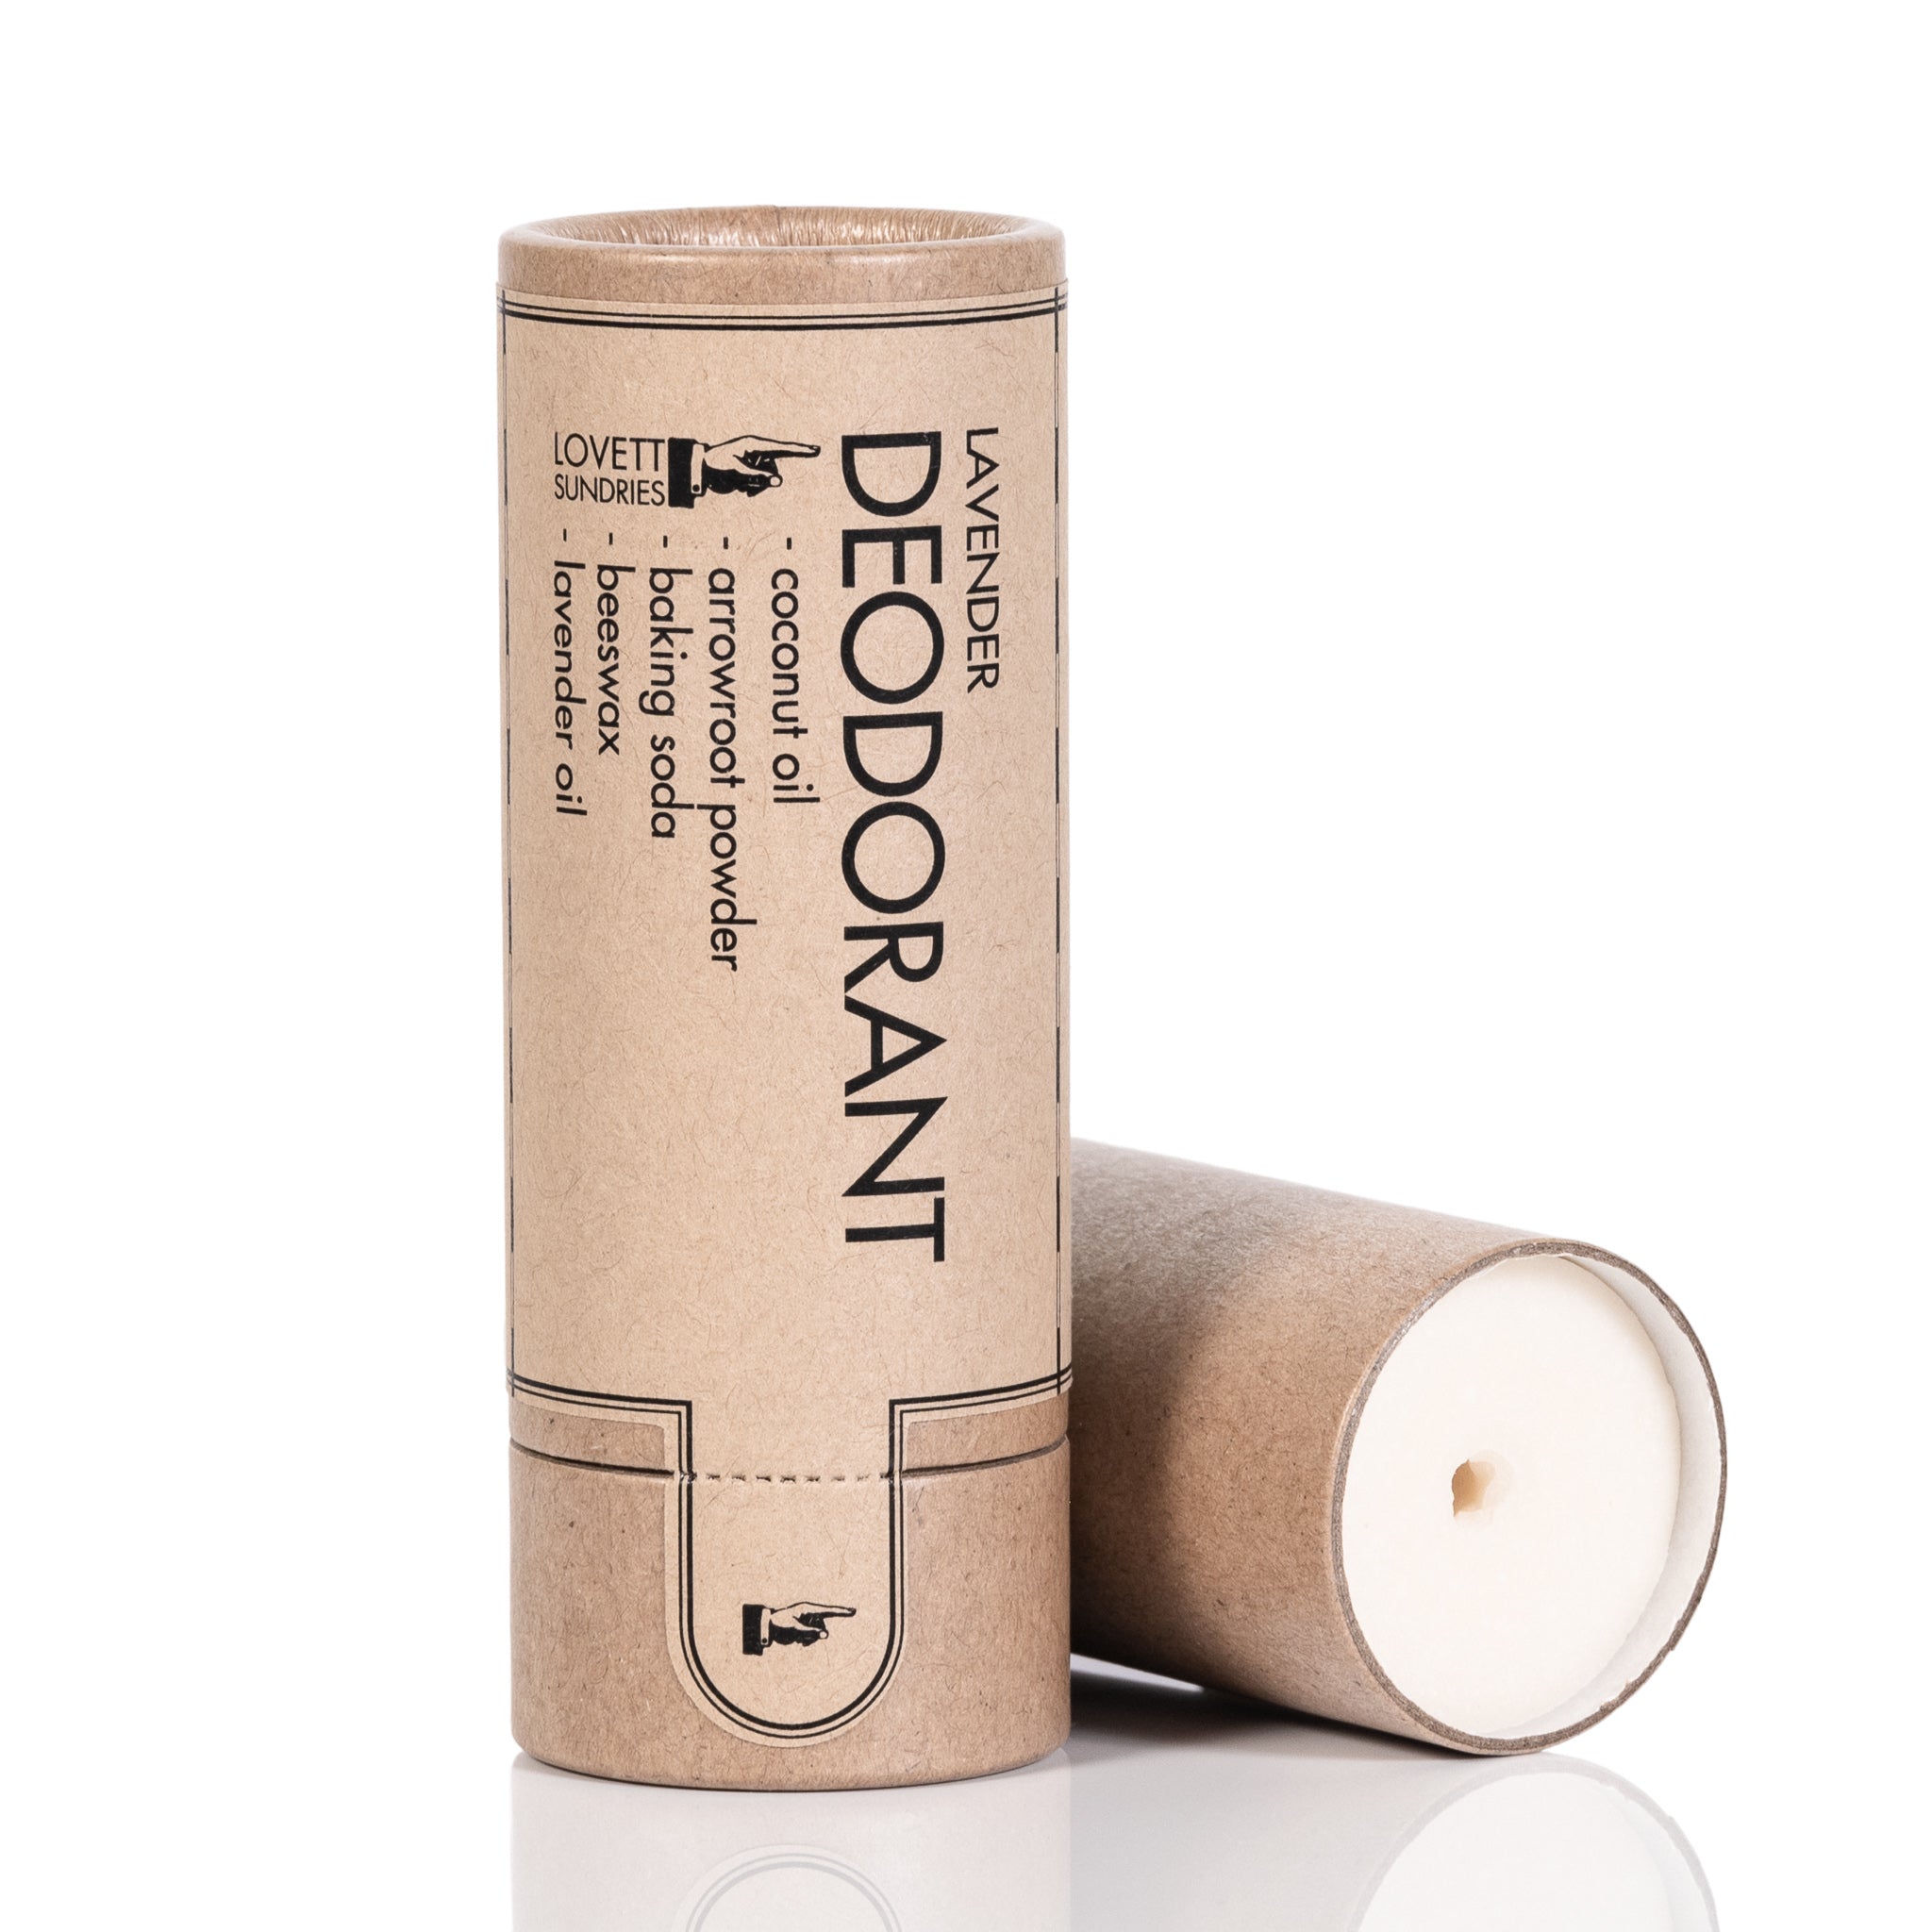 Lavender-scented aluminum-free deodorant in a recyclable container with a white background.